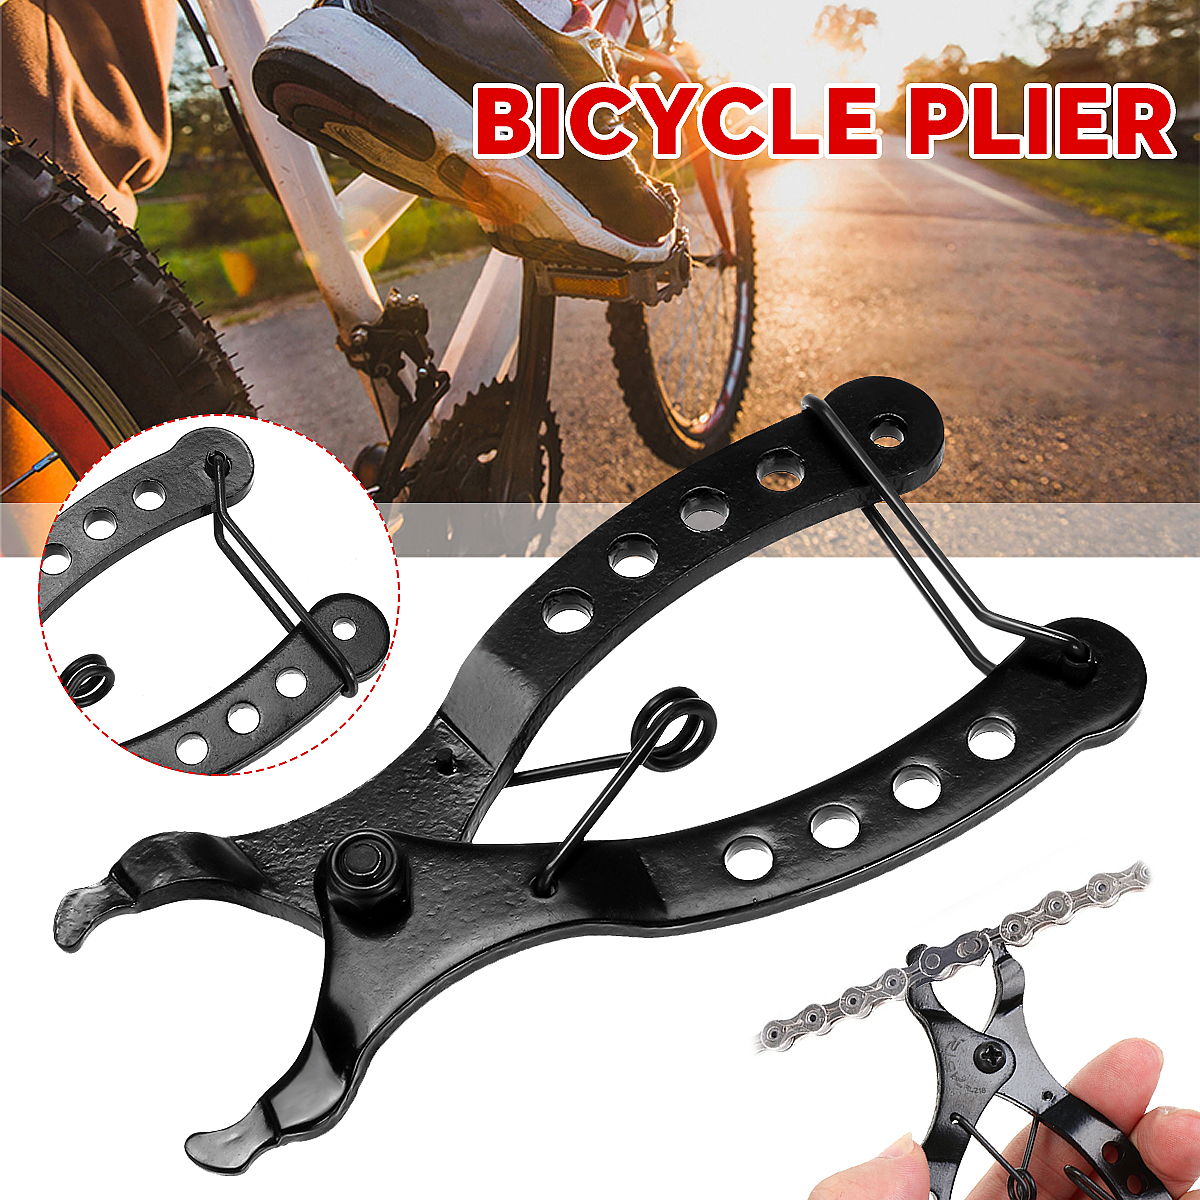 Mini-Chain-Quick-Link-Tool-Bicycle-Plier-Mountain-Bike-Chains-Clamp-Buckle-1749898-2